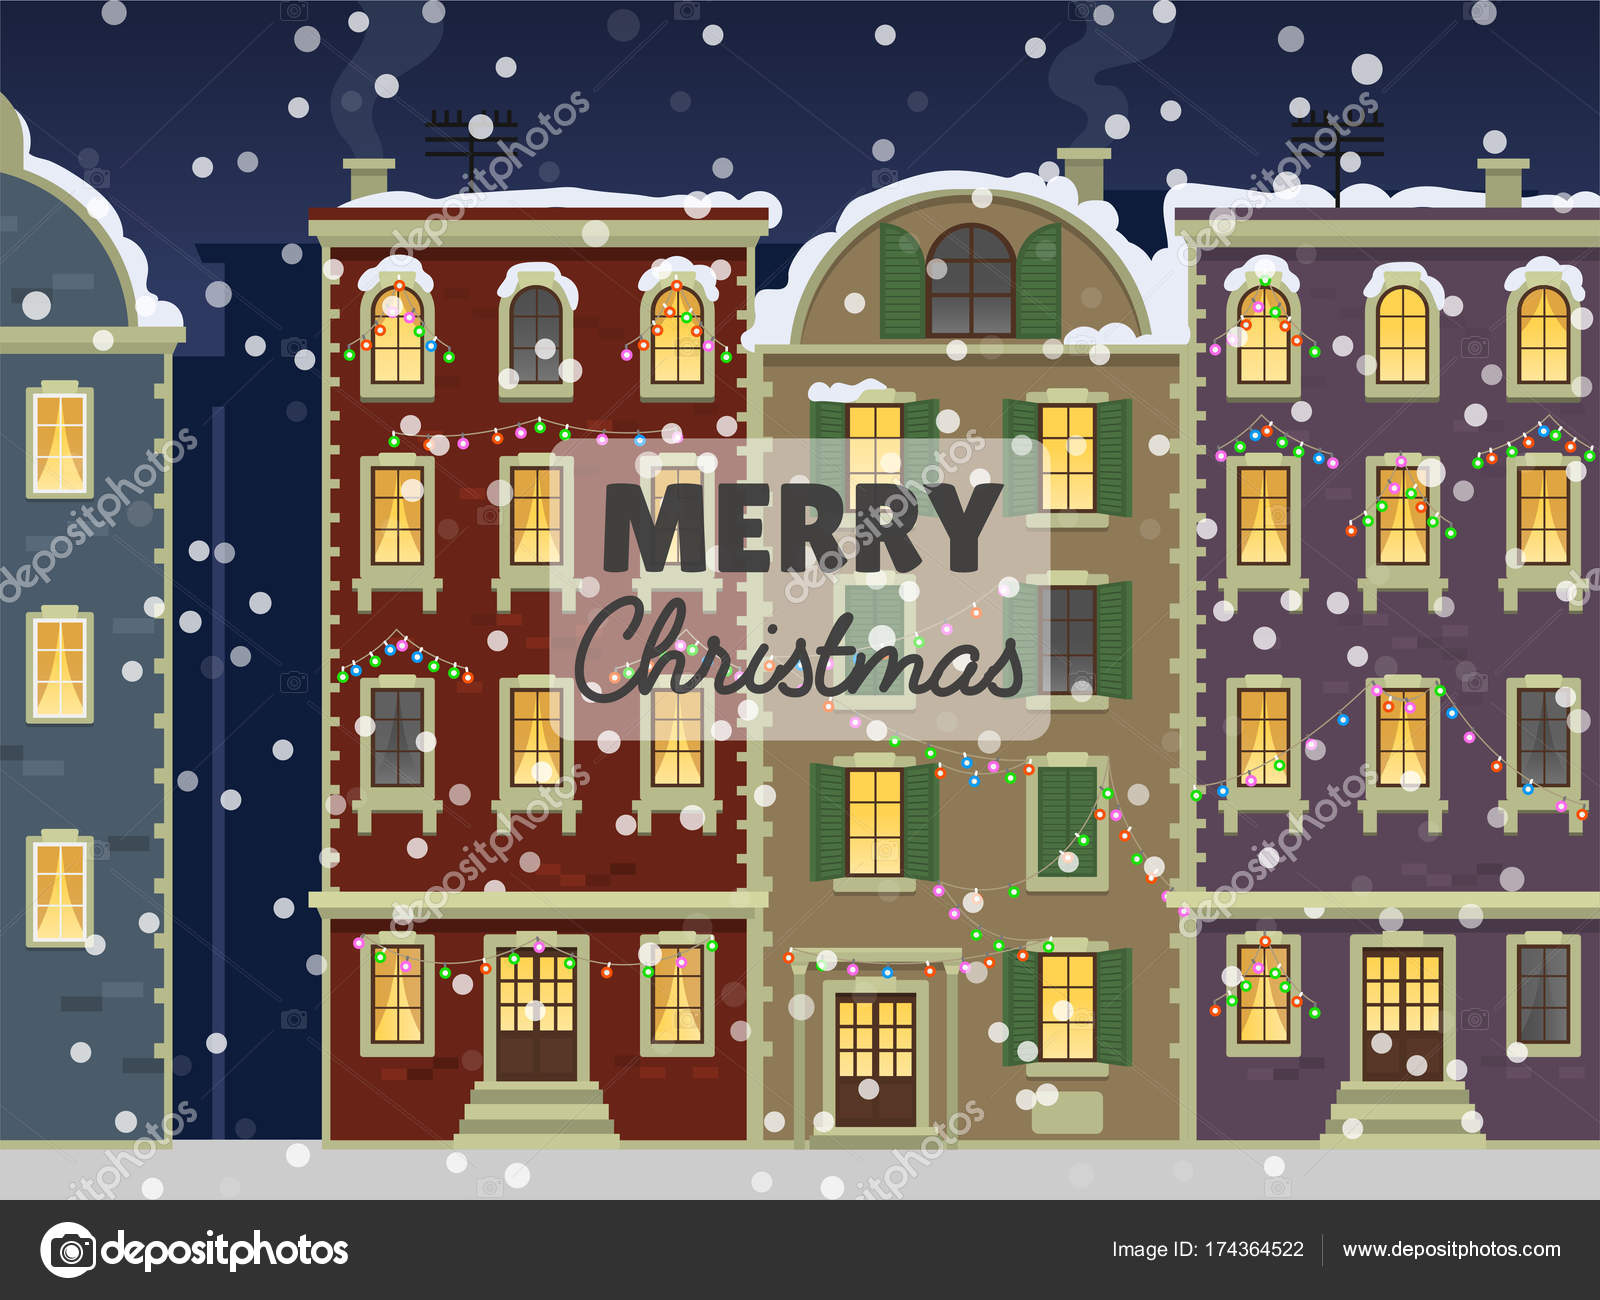 Christmas Wallpaper With Houses - HD Wallpaper 